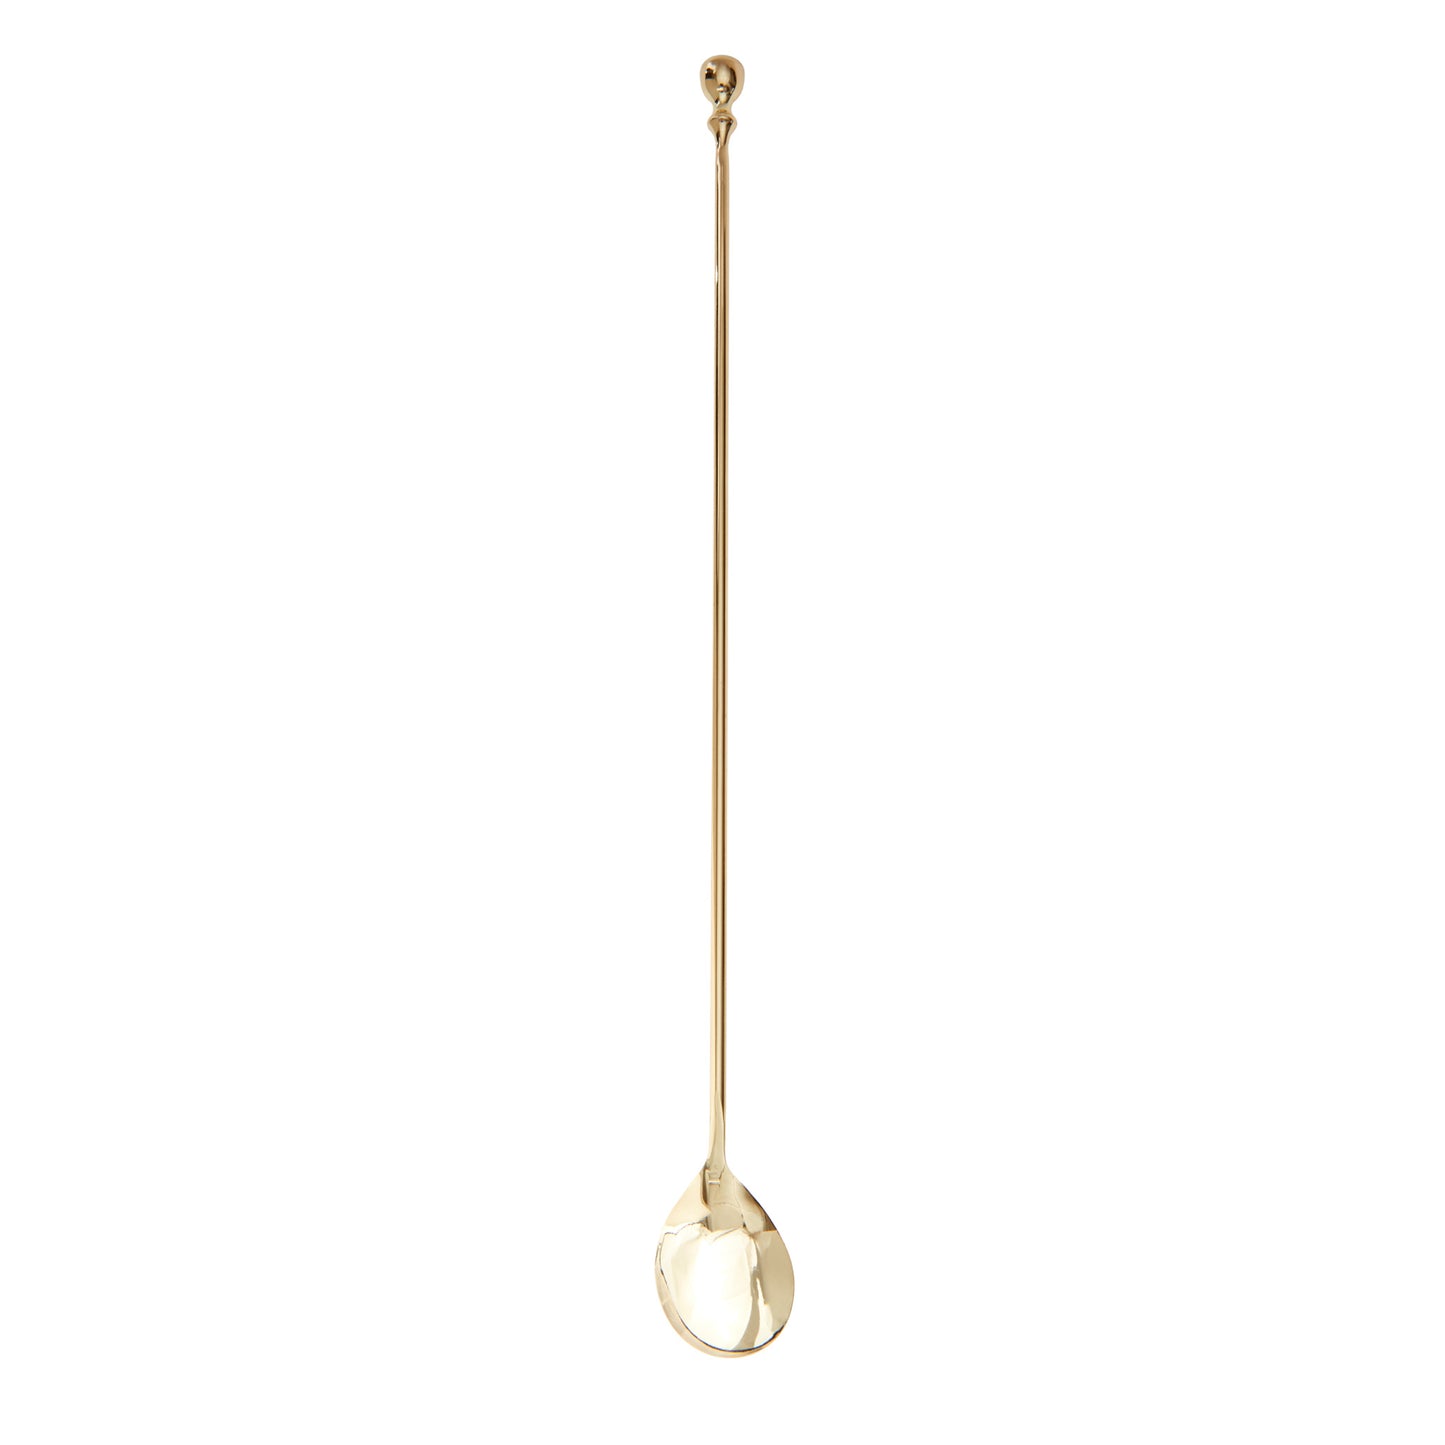 LEOPOLD® BARSPOON / GOLD-PLATED / 36cm